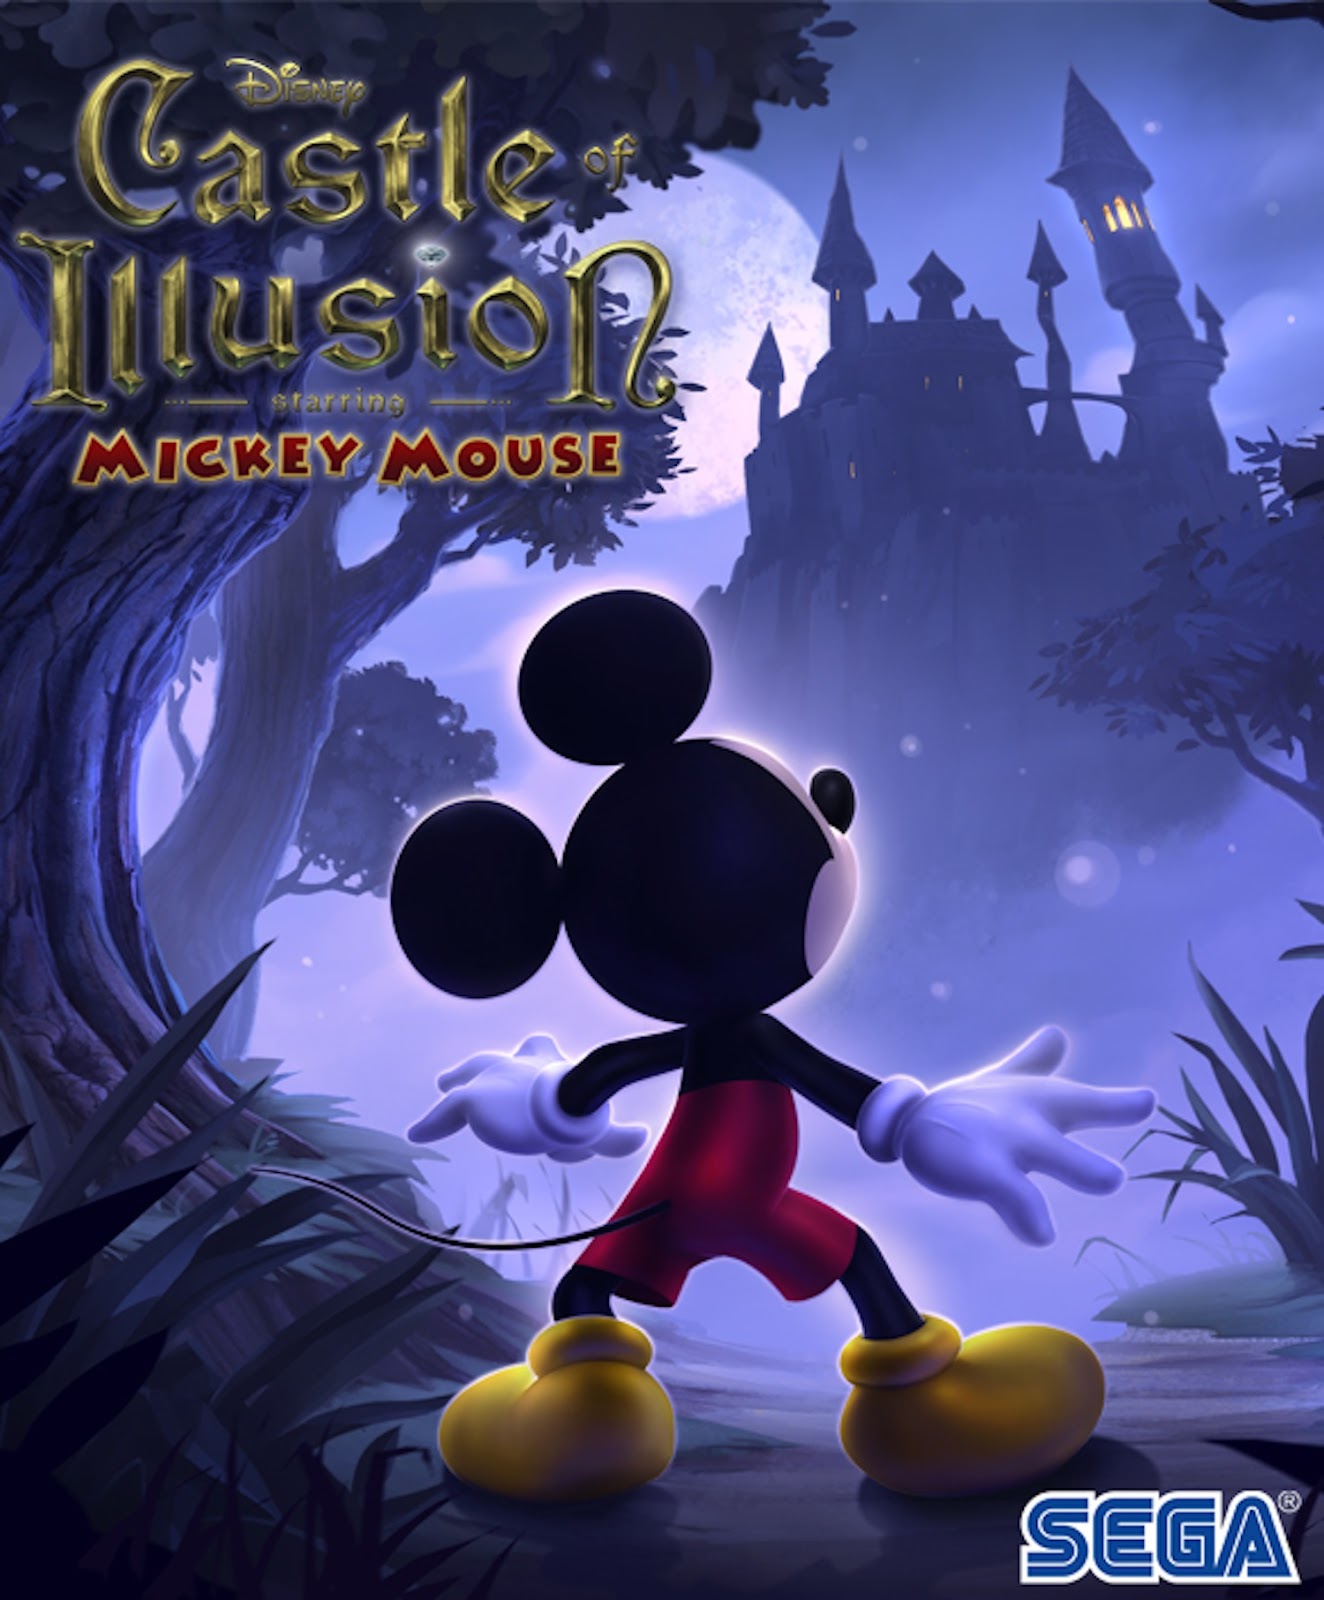 Игры illusion 2013. Castle of Illusion starring Mickey Mouse ps3 обложка. Castle of Illusion starring Mickey Mouse (игра, 2013). Castle of Illusion starring Mickey Mouse игра. Castle of Illusion ps3 на диске.